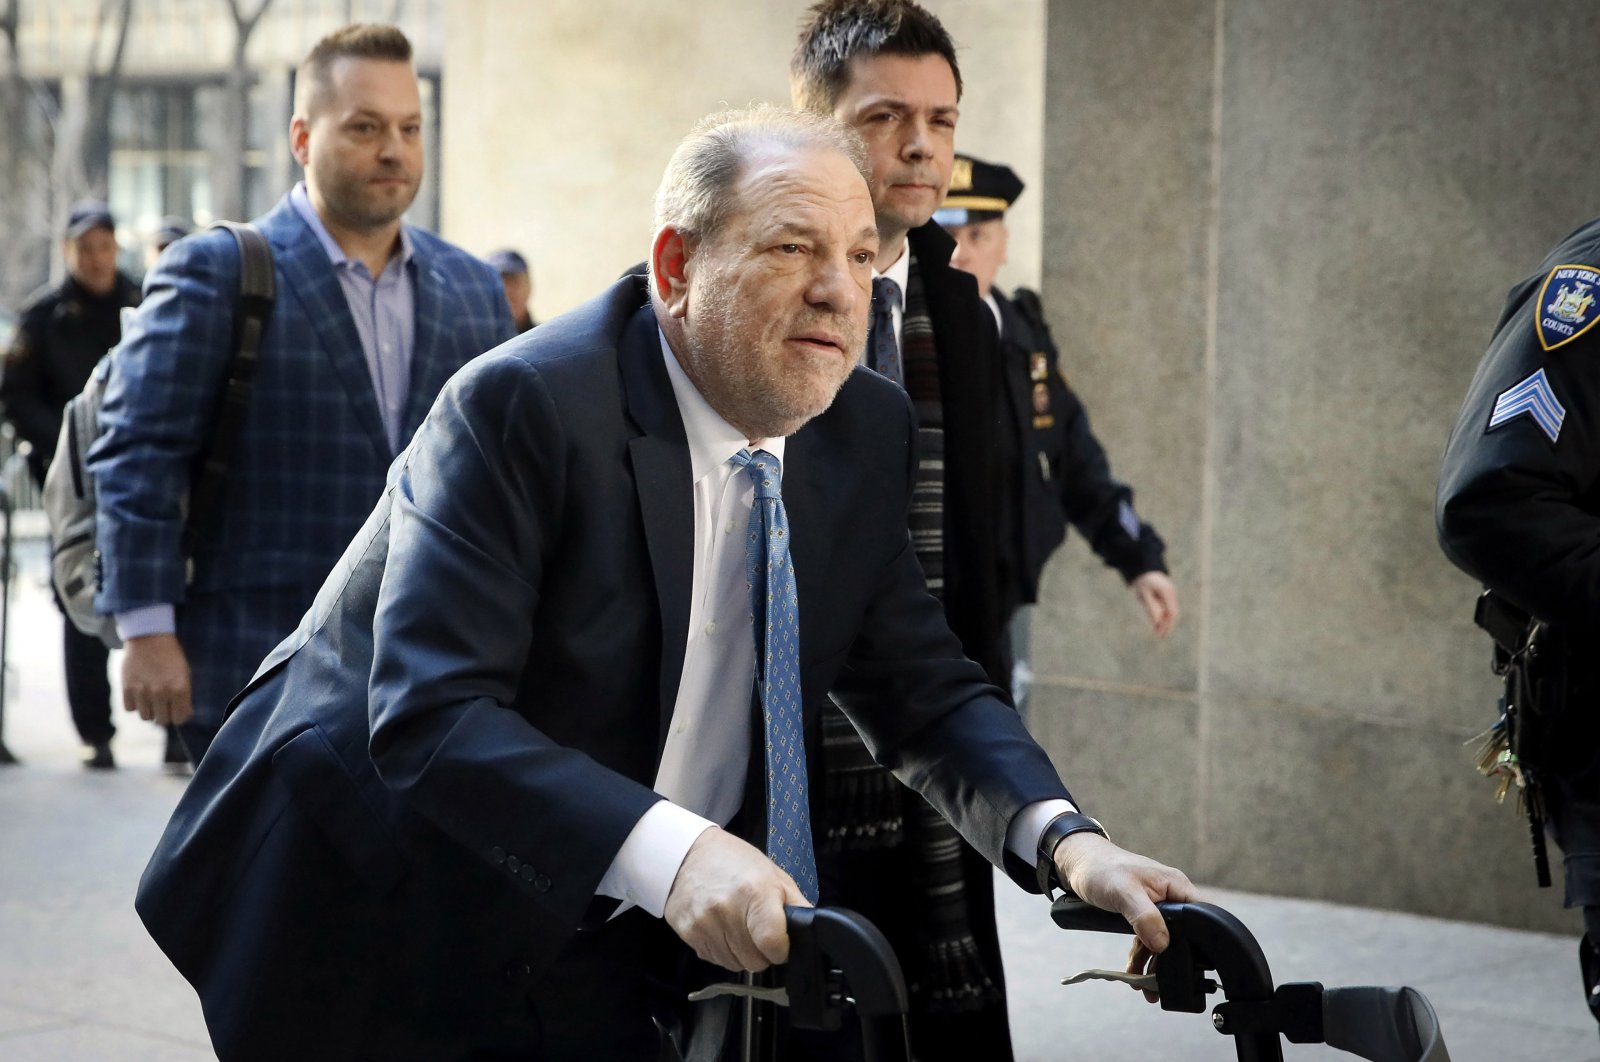 Harvey Weinstein arrives at a Manhattan courthouse as jury deliberations continue in his rape trial in New York, U.S., Feb. 24, 2020. (AP File Photo)